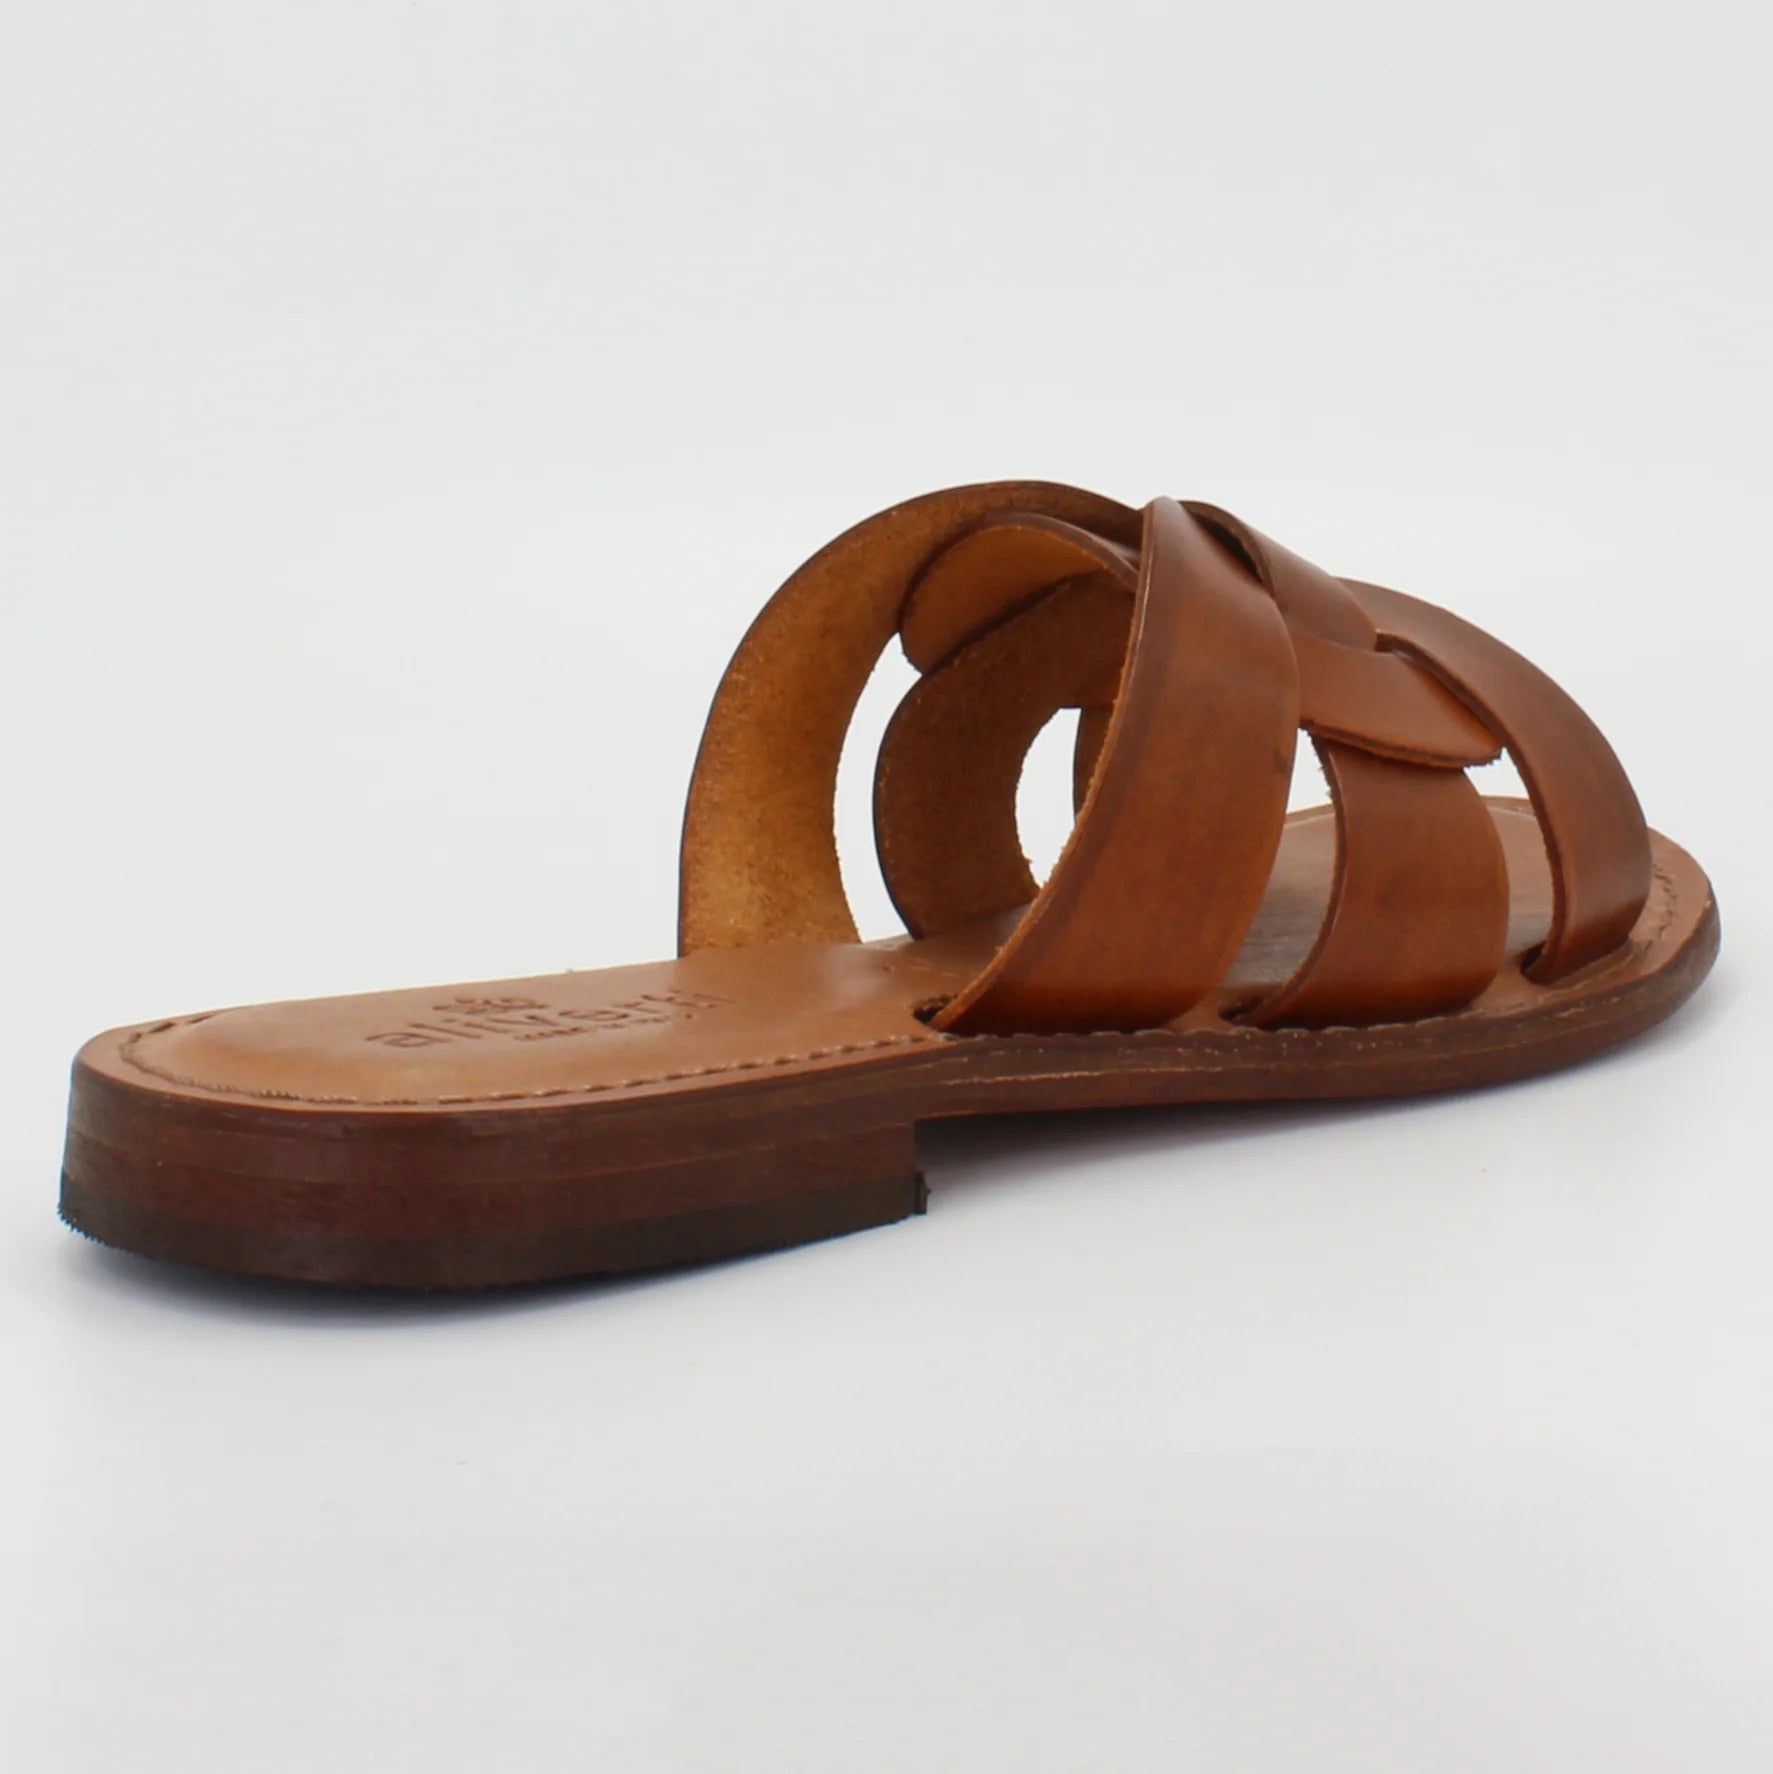 Shop Handmade Italian Leather sandal in tan (1801) or browse our range of hand-made Italian shoes in leather or suede in-store at Aliverti Cape Town, or shop online. We deliver in South Africa & offer multiple payment plans as well as accept multiple safe & secure payment methods.